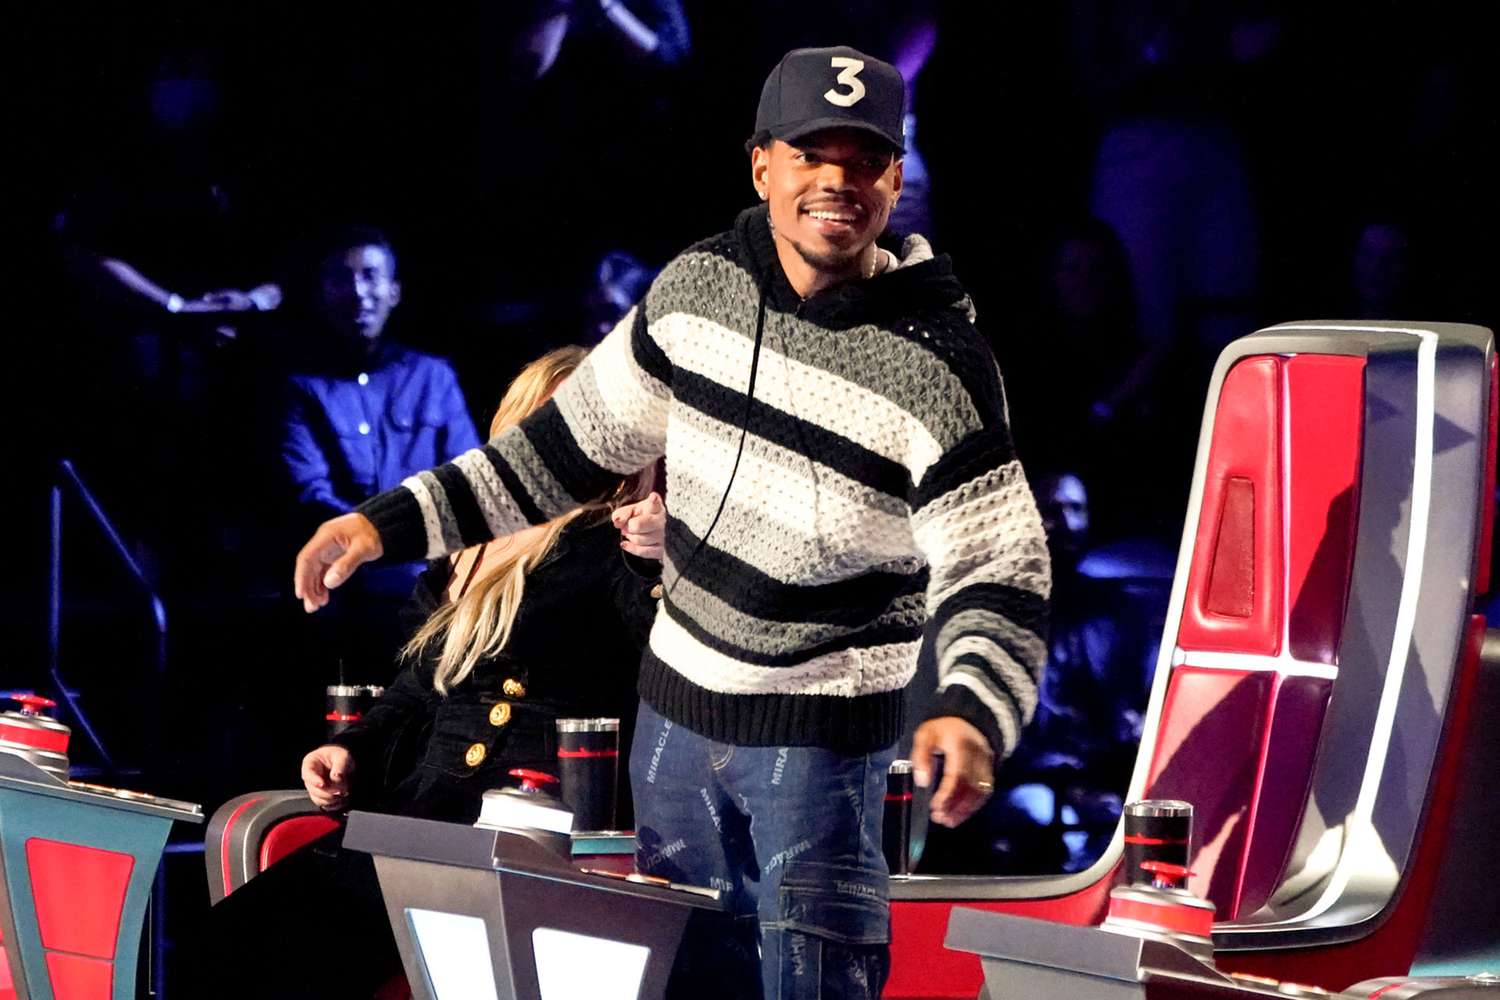 THE VOICE -- "Blind Auditions" Episode -- Pictured: Chance The Rapper -- (Photo by: Evans Vestal Ward/NBC)